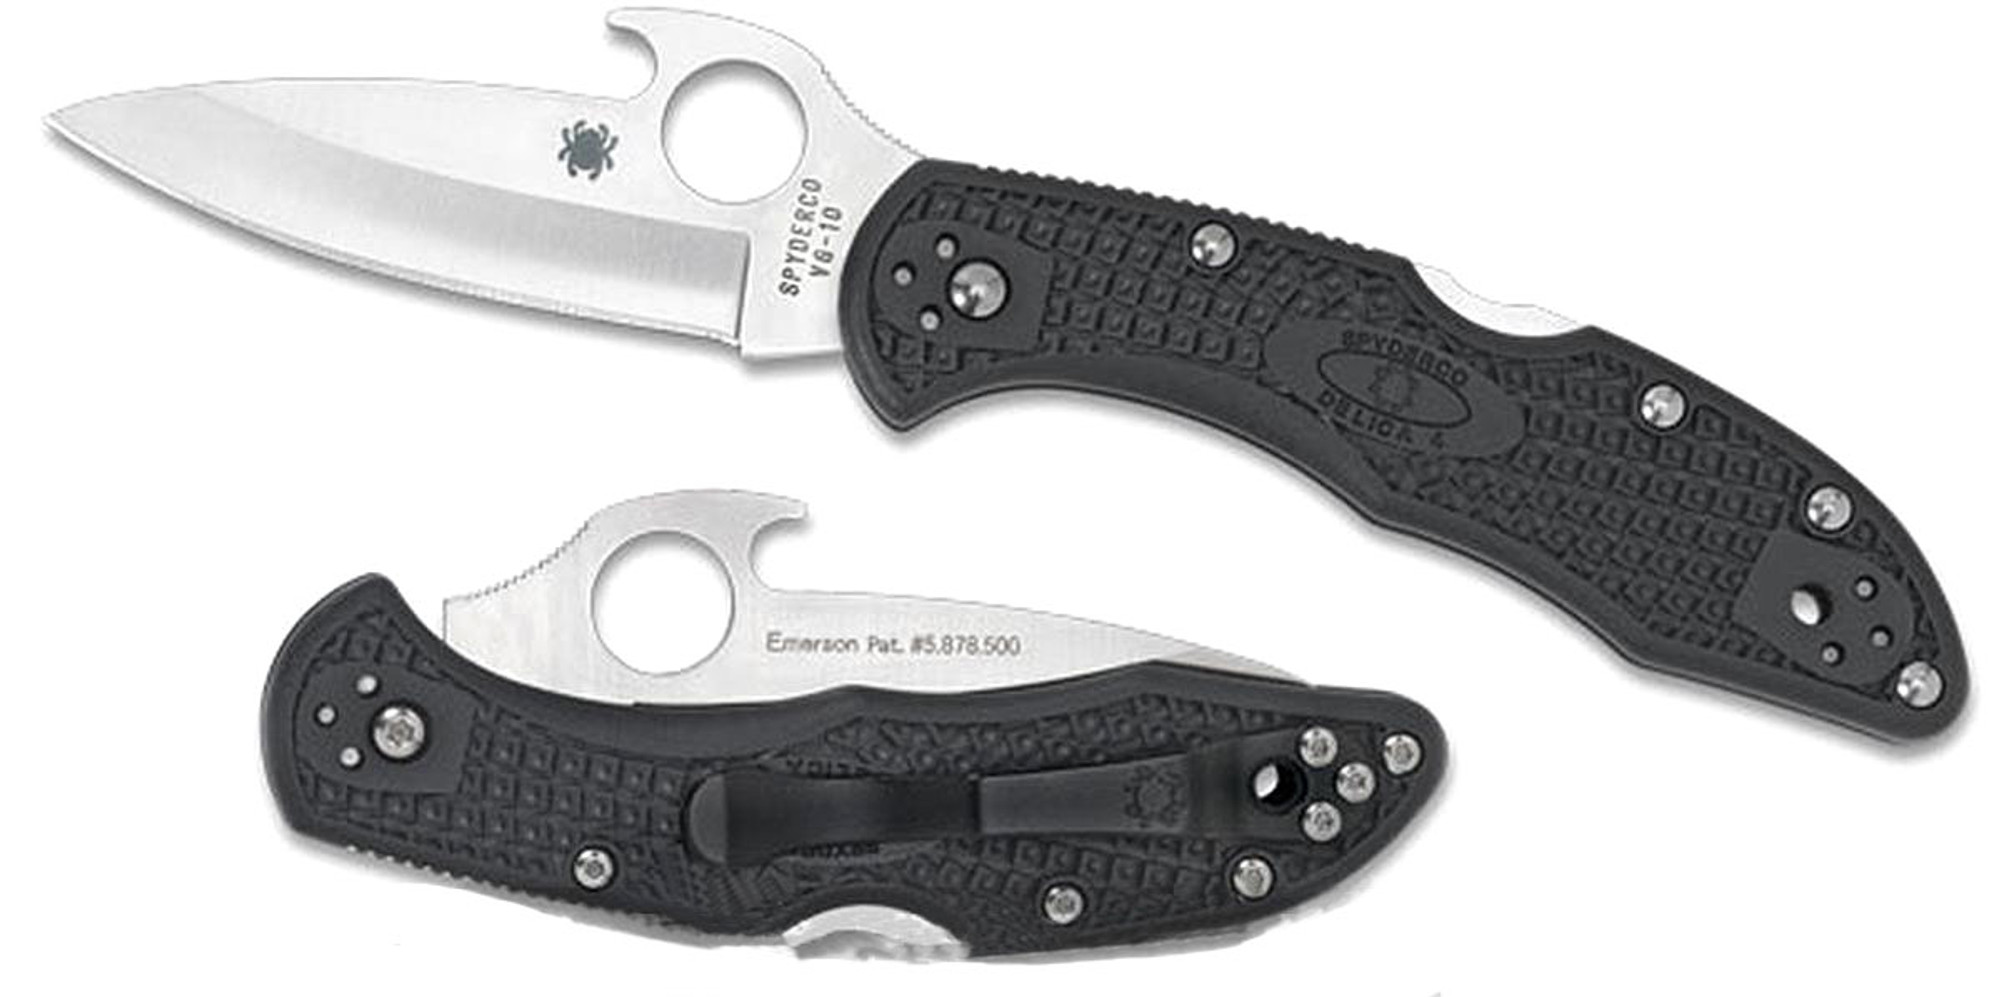 Spyderco Delica4 Grey Folding Knife with FRN Grips and Emerson Wave - Plain Edge